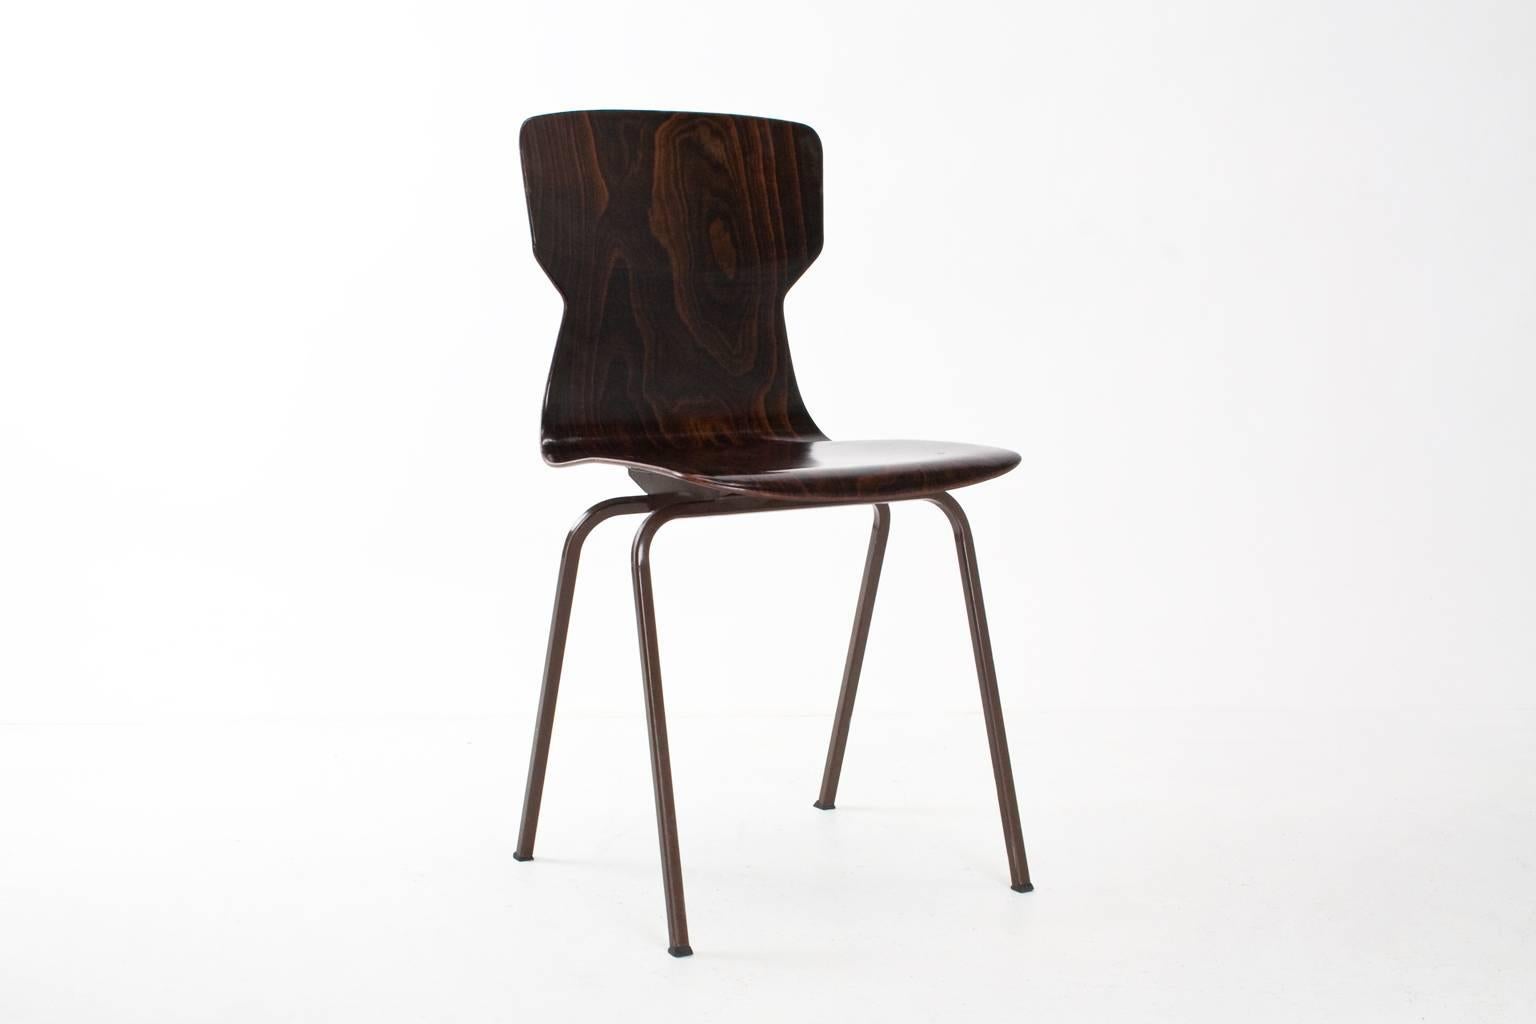 Dutch Stock of 1970s Industrial School Chairs by Eromes Wijchen 'NL'